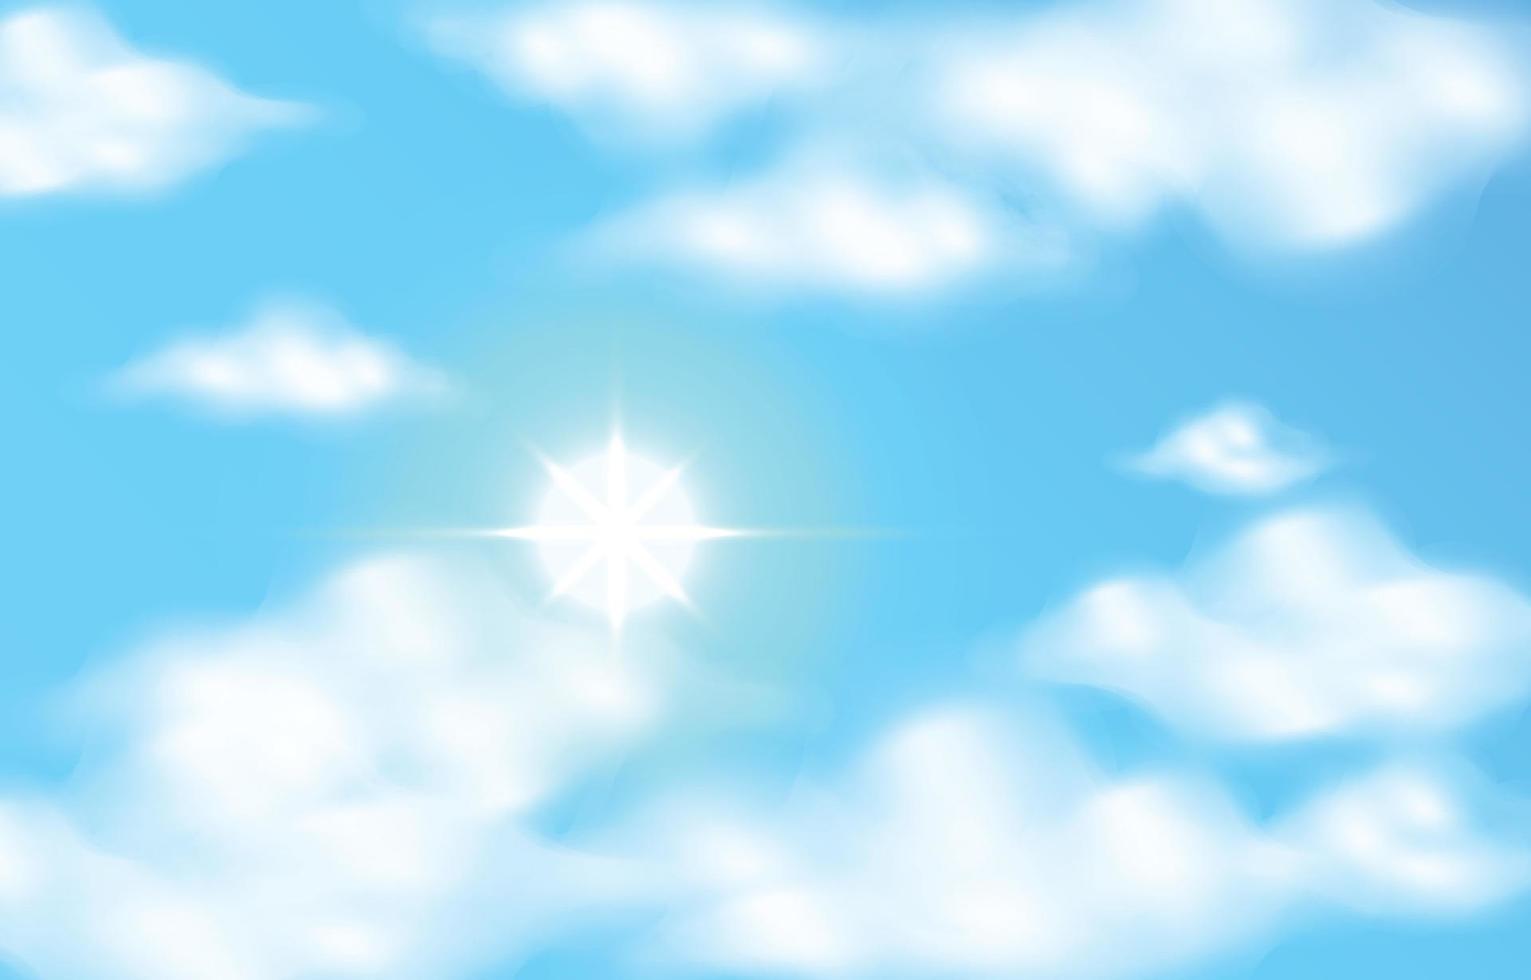 Realistic Blue Sky with Shining Sun vector